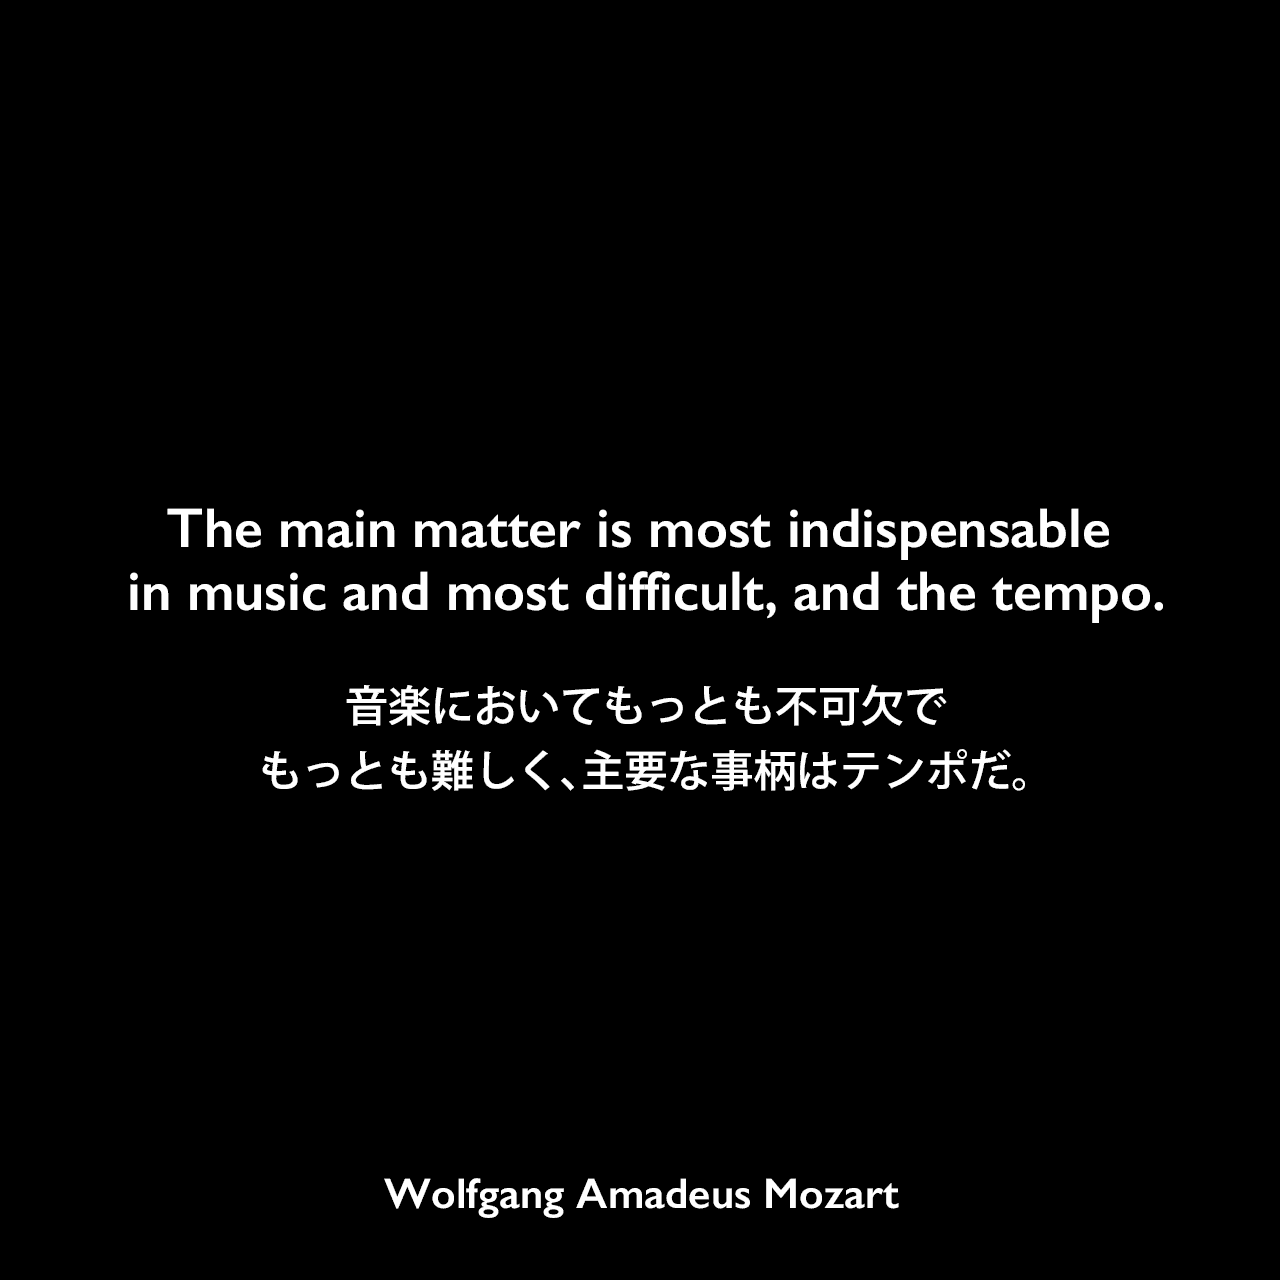 The main matter is most indispensable in music and most difficult, and the tempo.音楽においてもっとも不可欠でもっとも難しく、主要な事柄はテンポだ。Wolfgang Amadeus Mozart